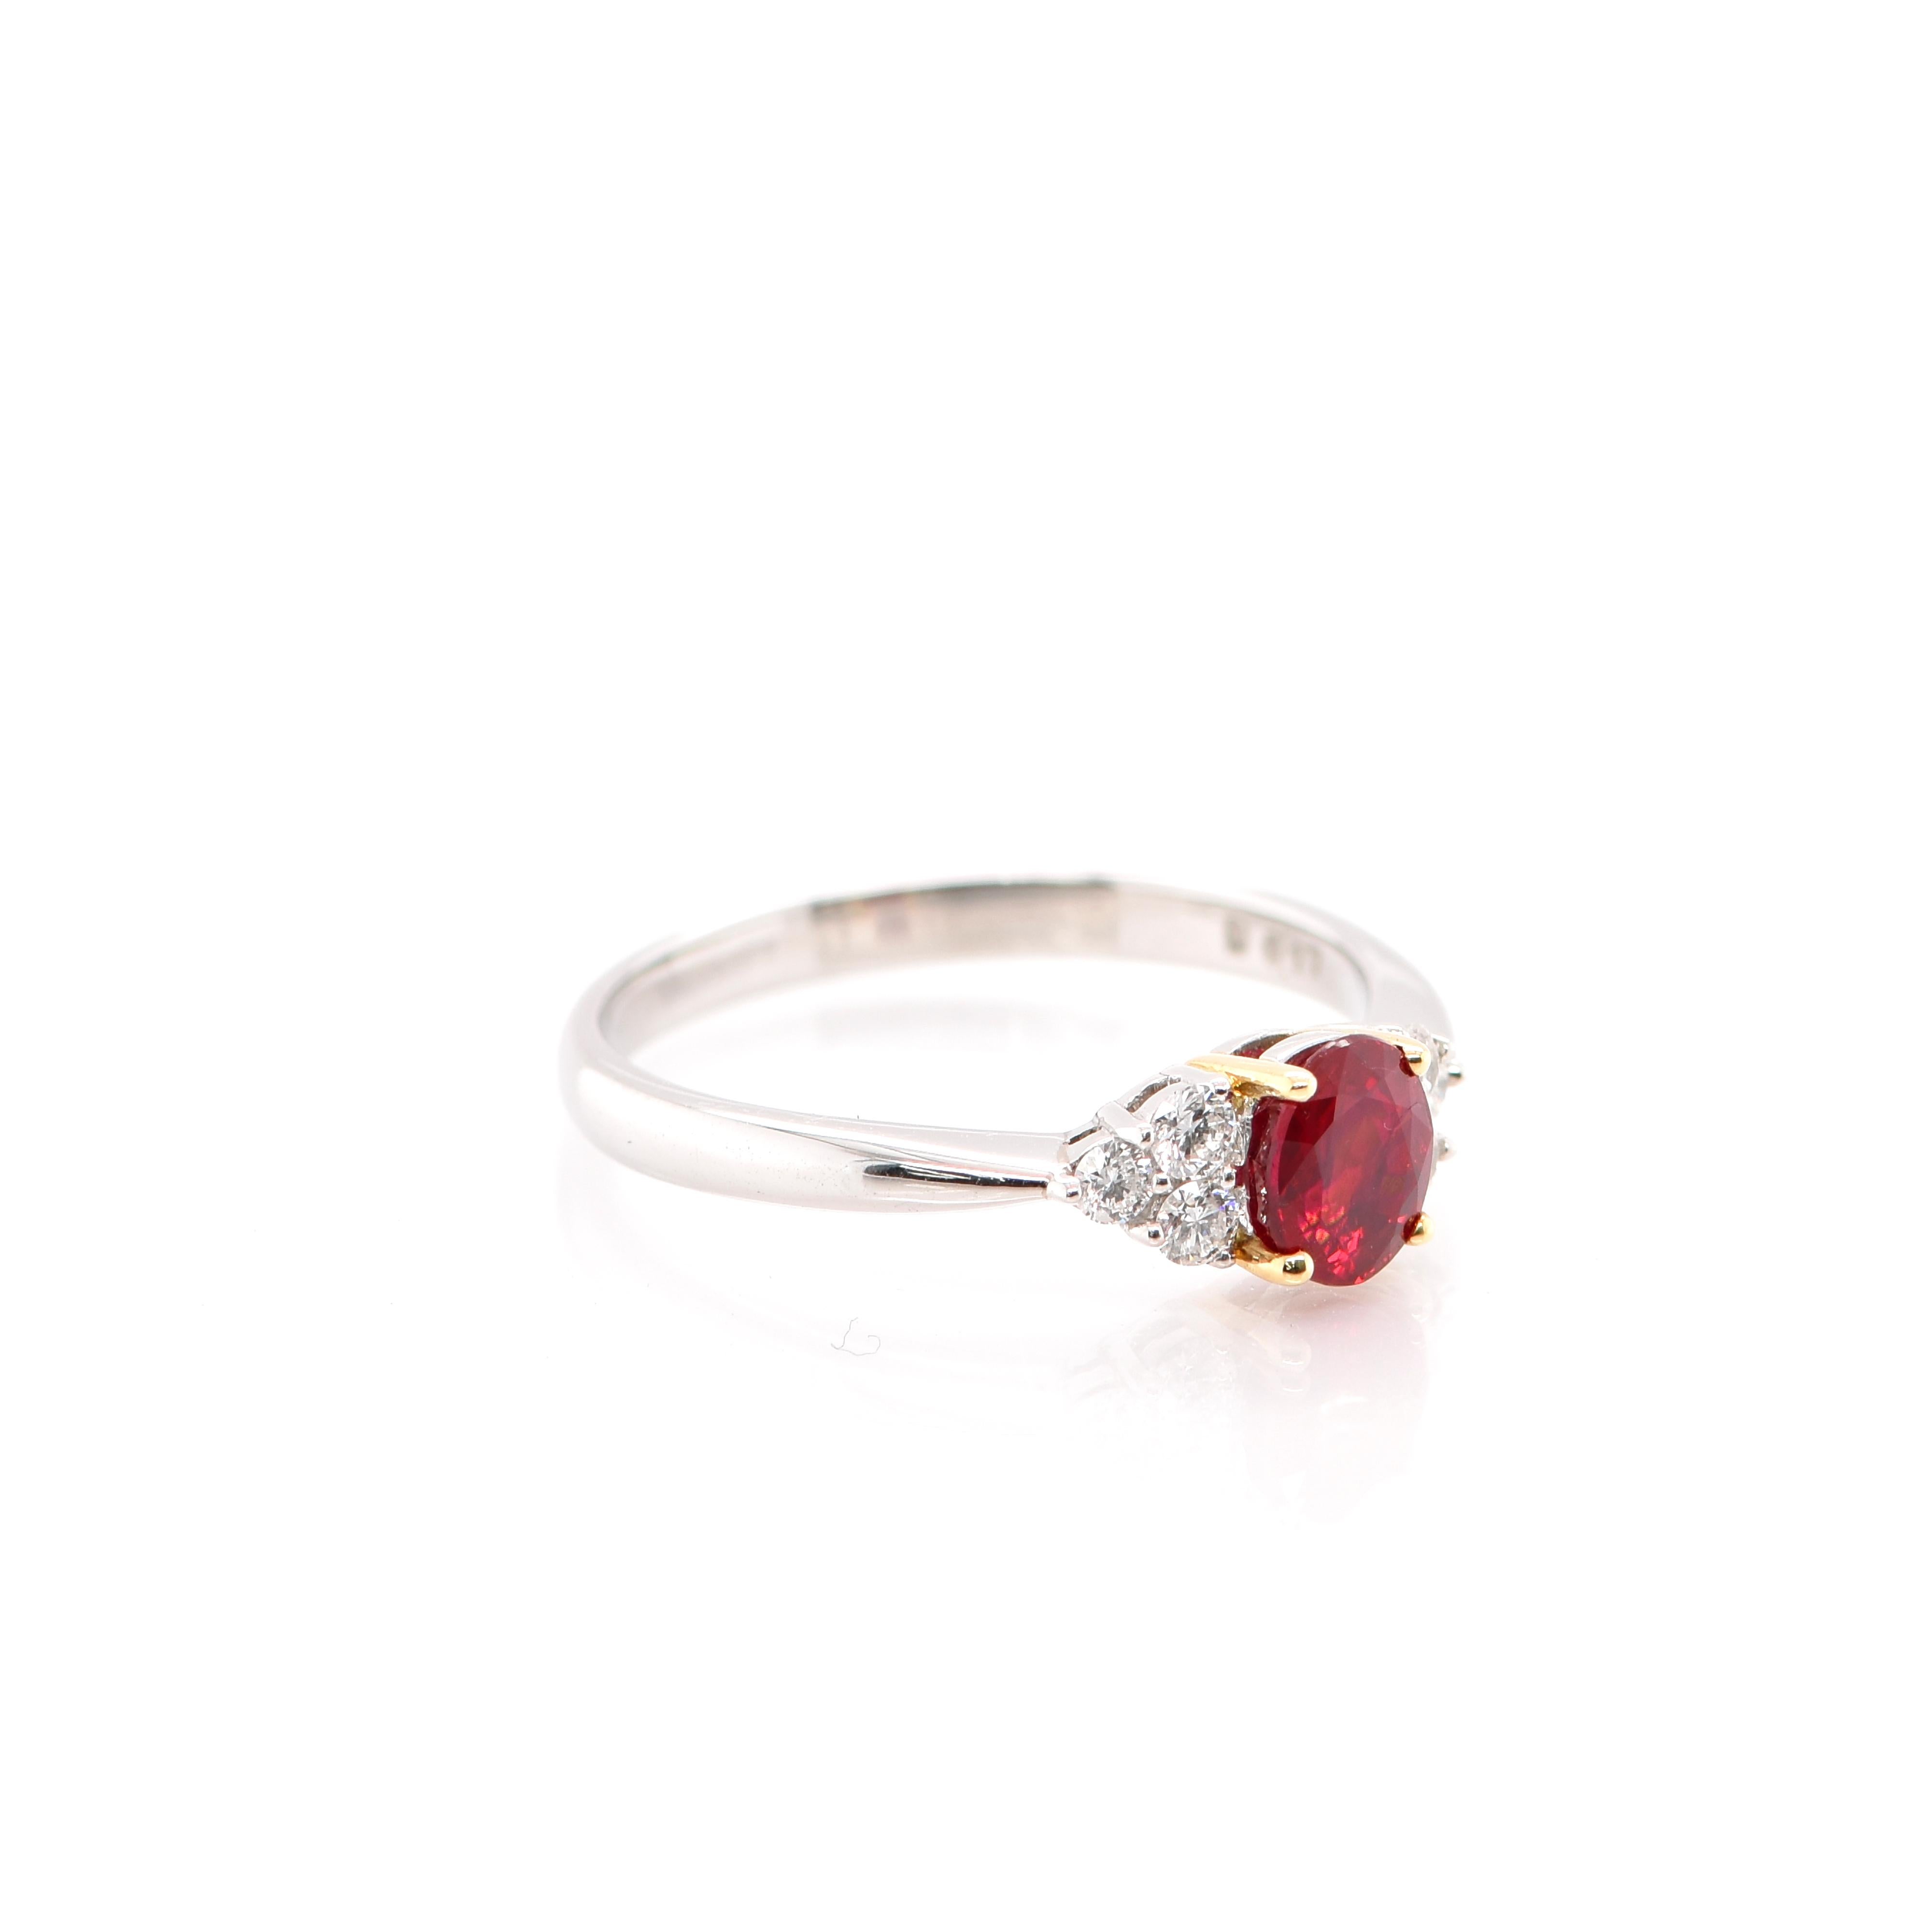 Oval Cut 0.99 Carat Ruby and Diamond Engagement Ring Set in Platinum and 18 Karat Gold